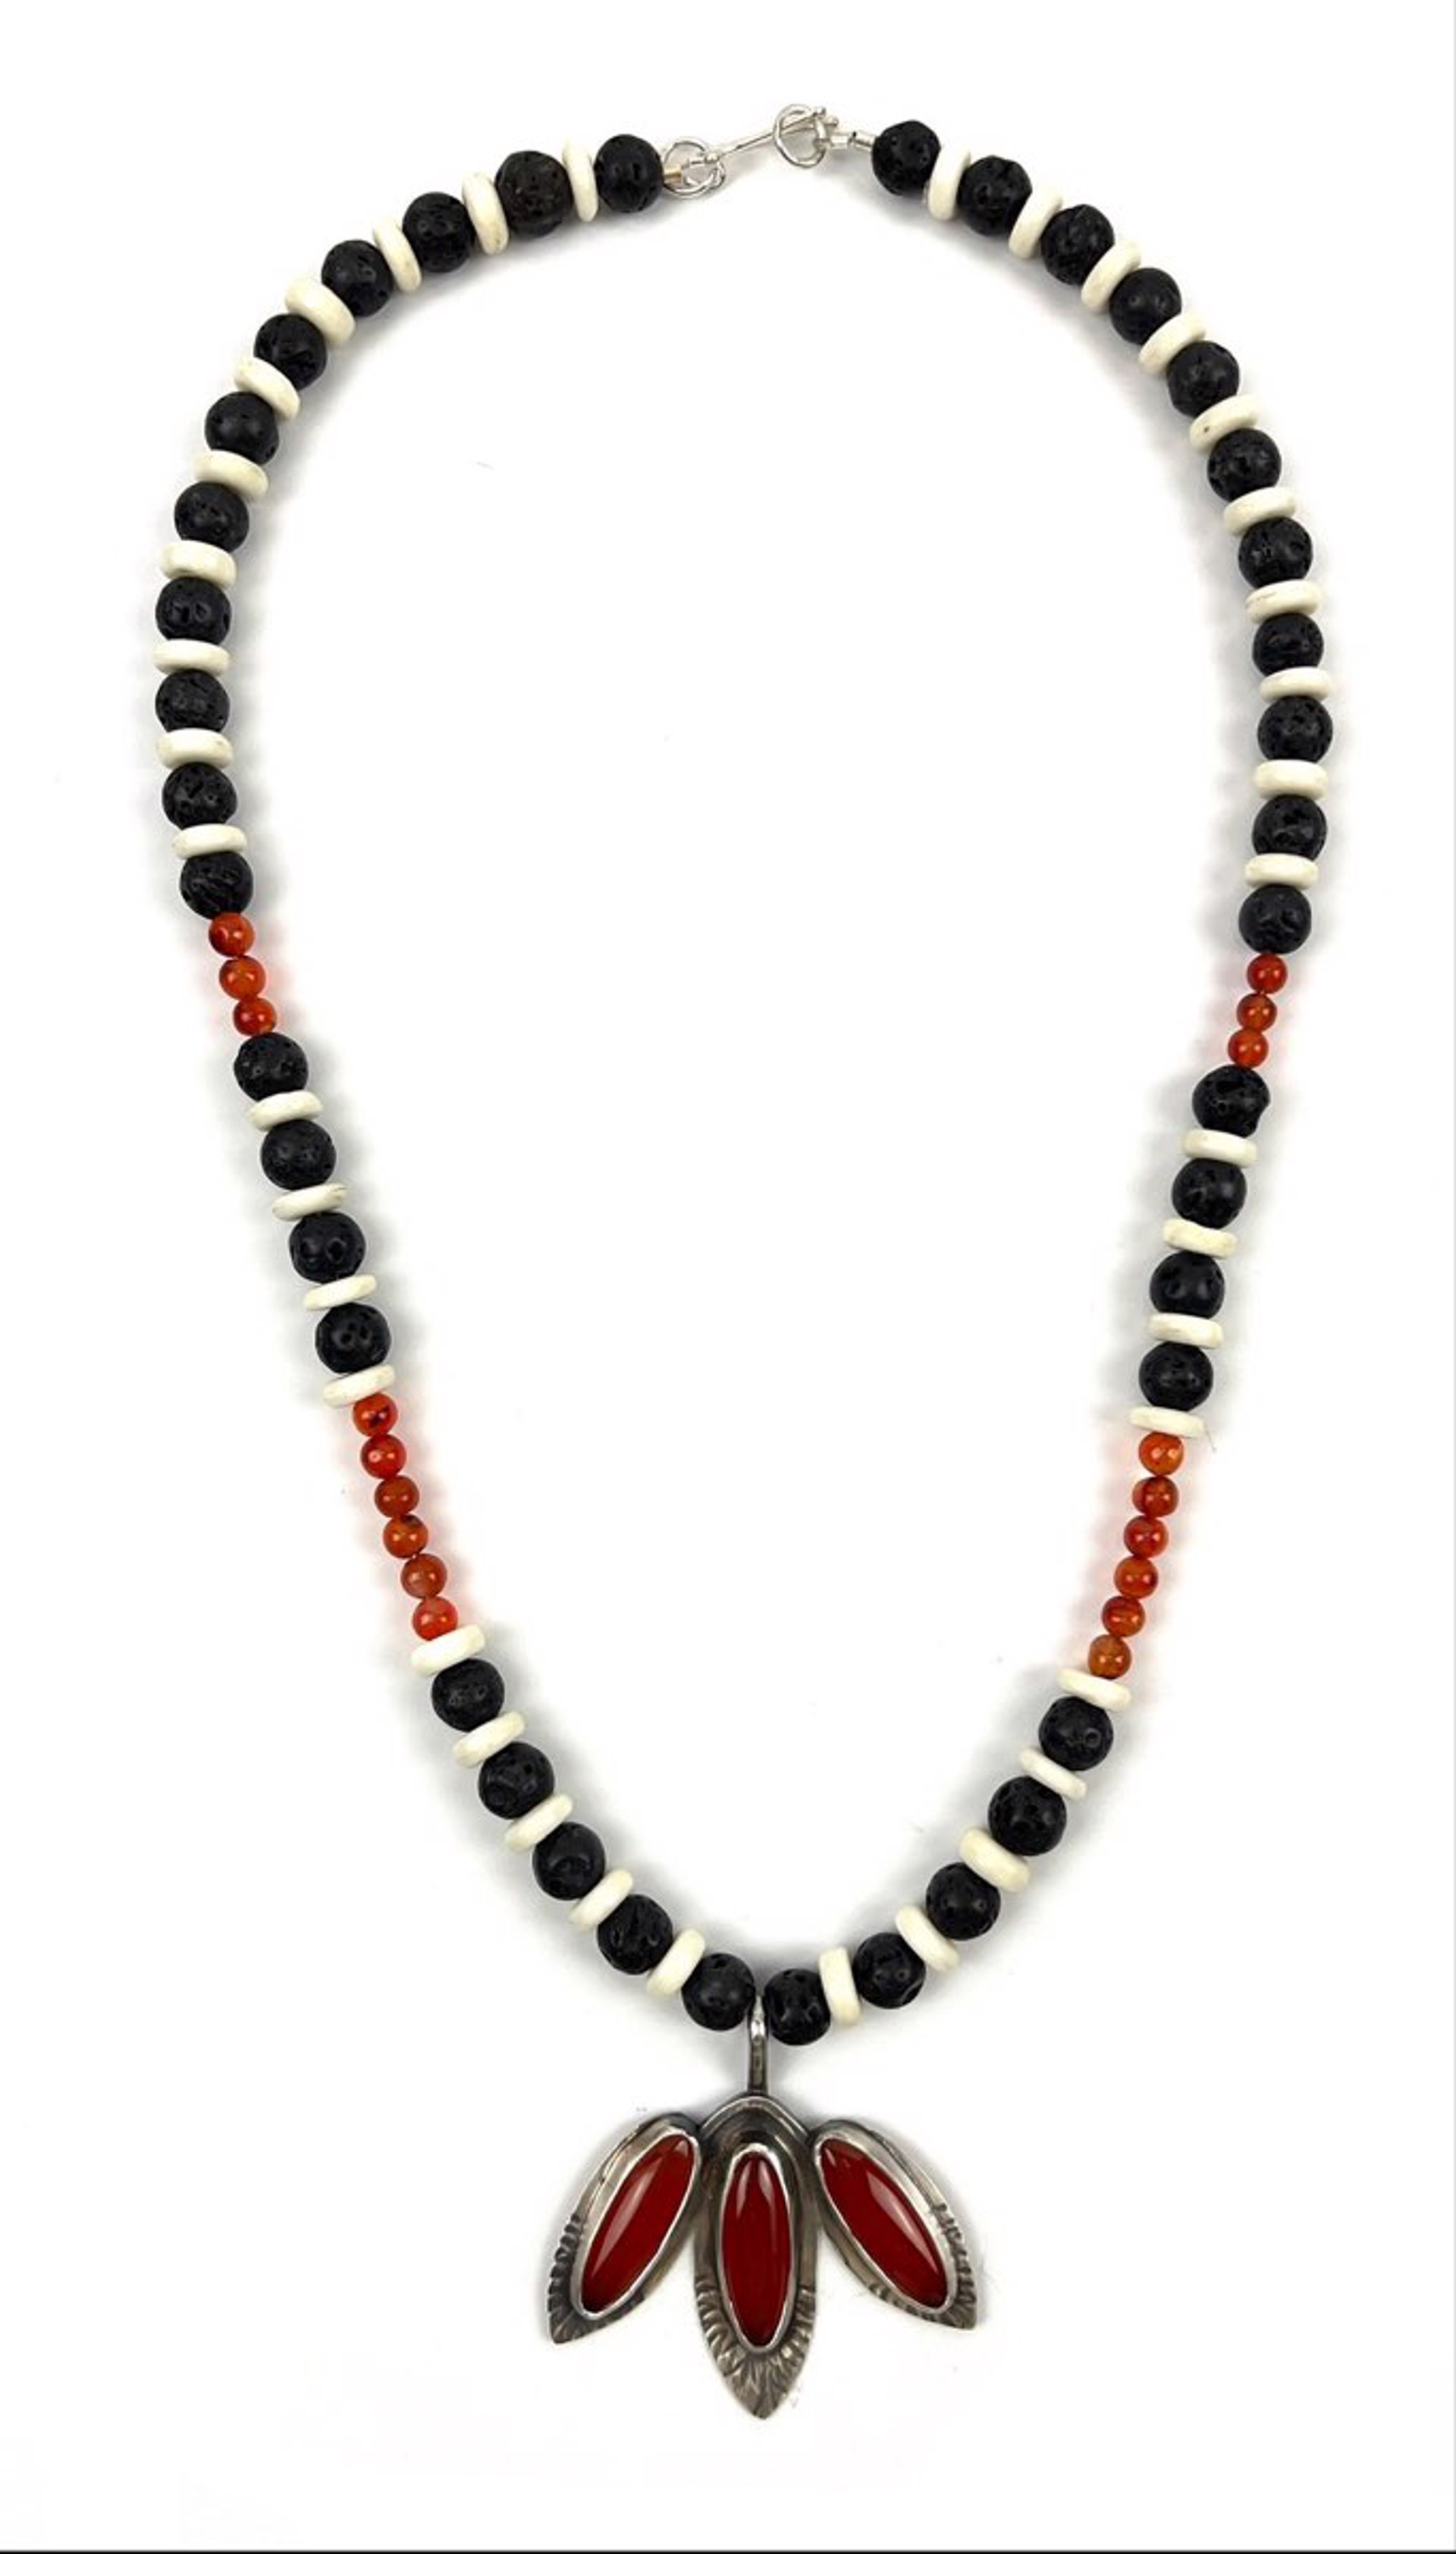 Carnelian with Lava and Bone Beads Sterling Silver Necklace by Anne Rob